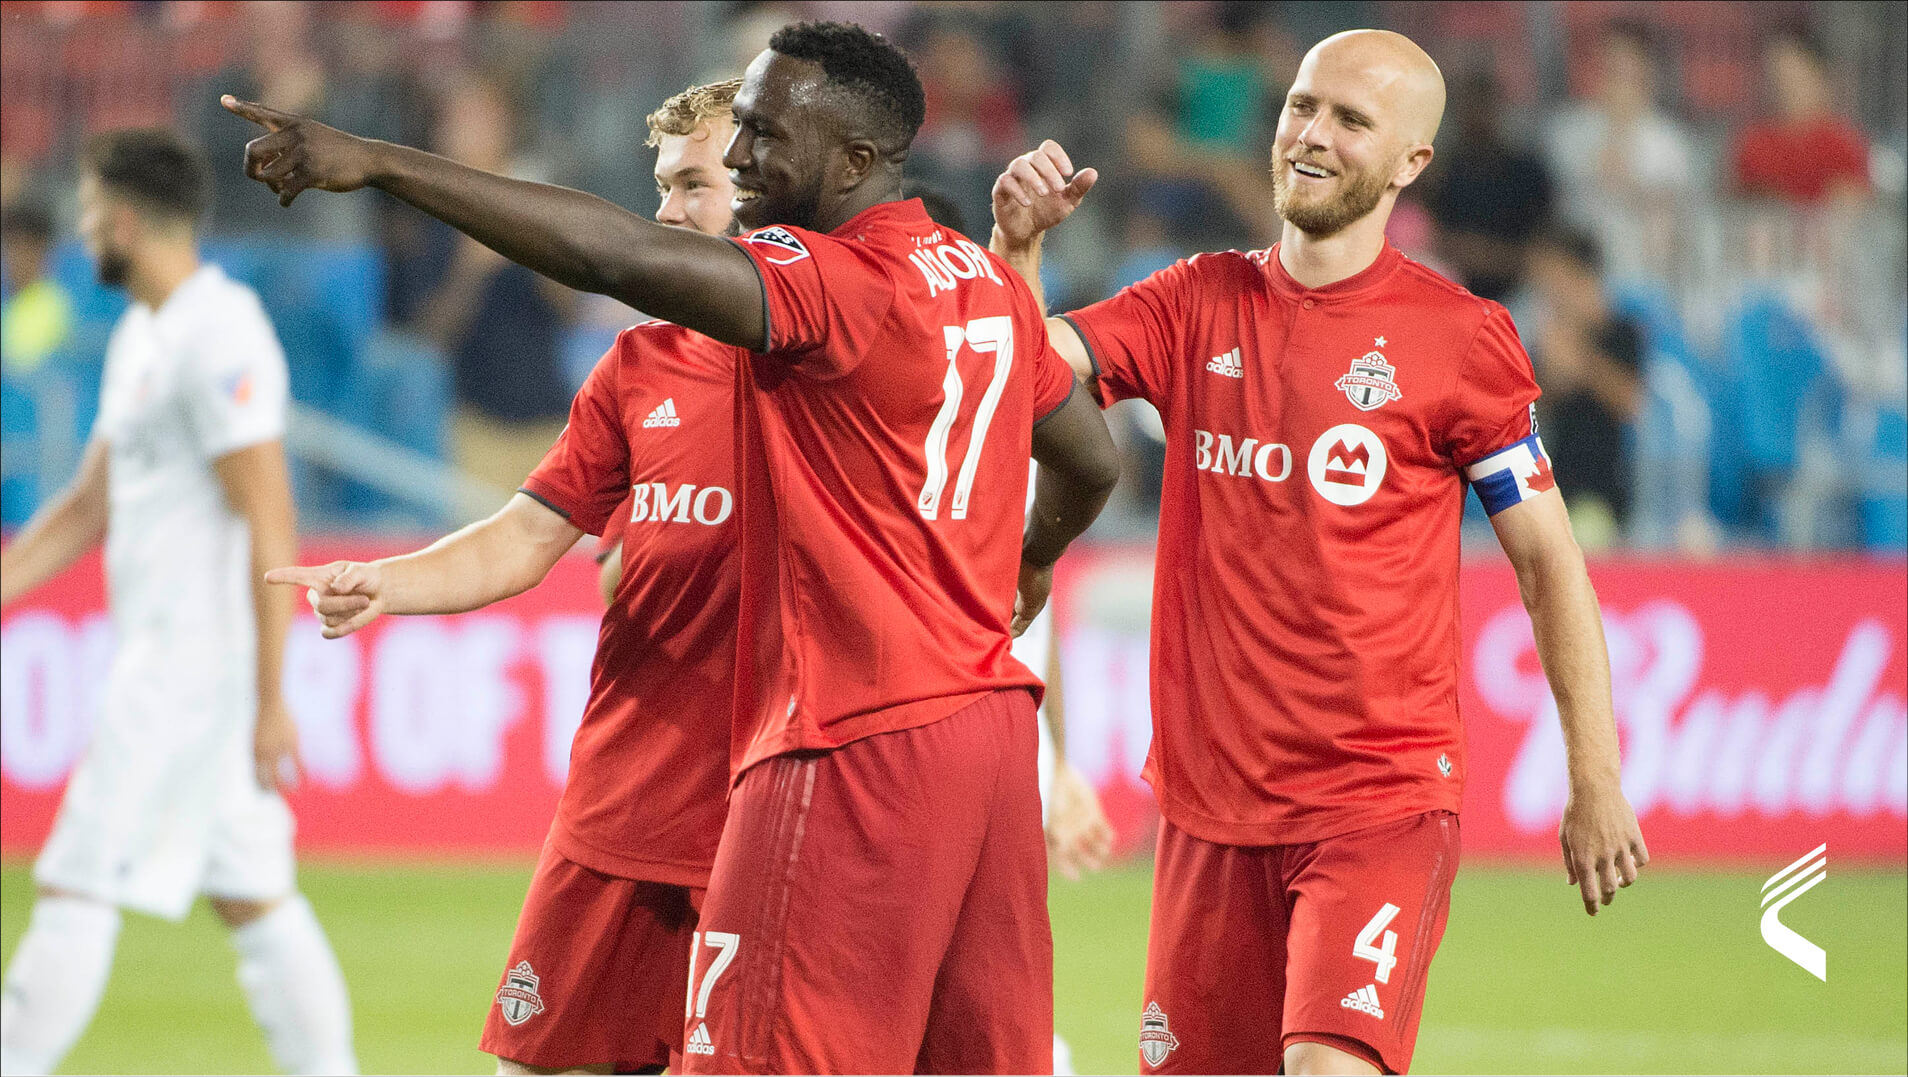 Toronto FC monitoring athletes remotely during COVID19 (part one